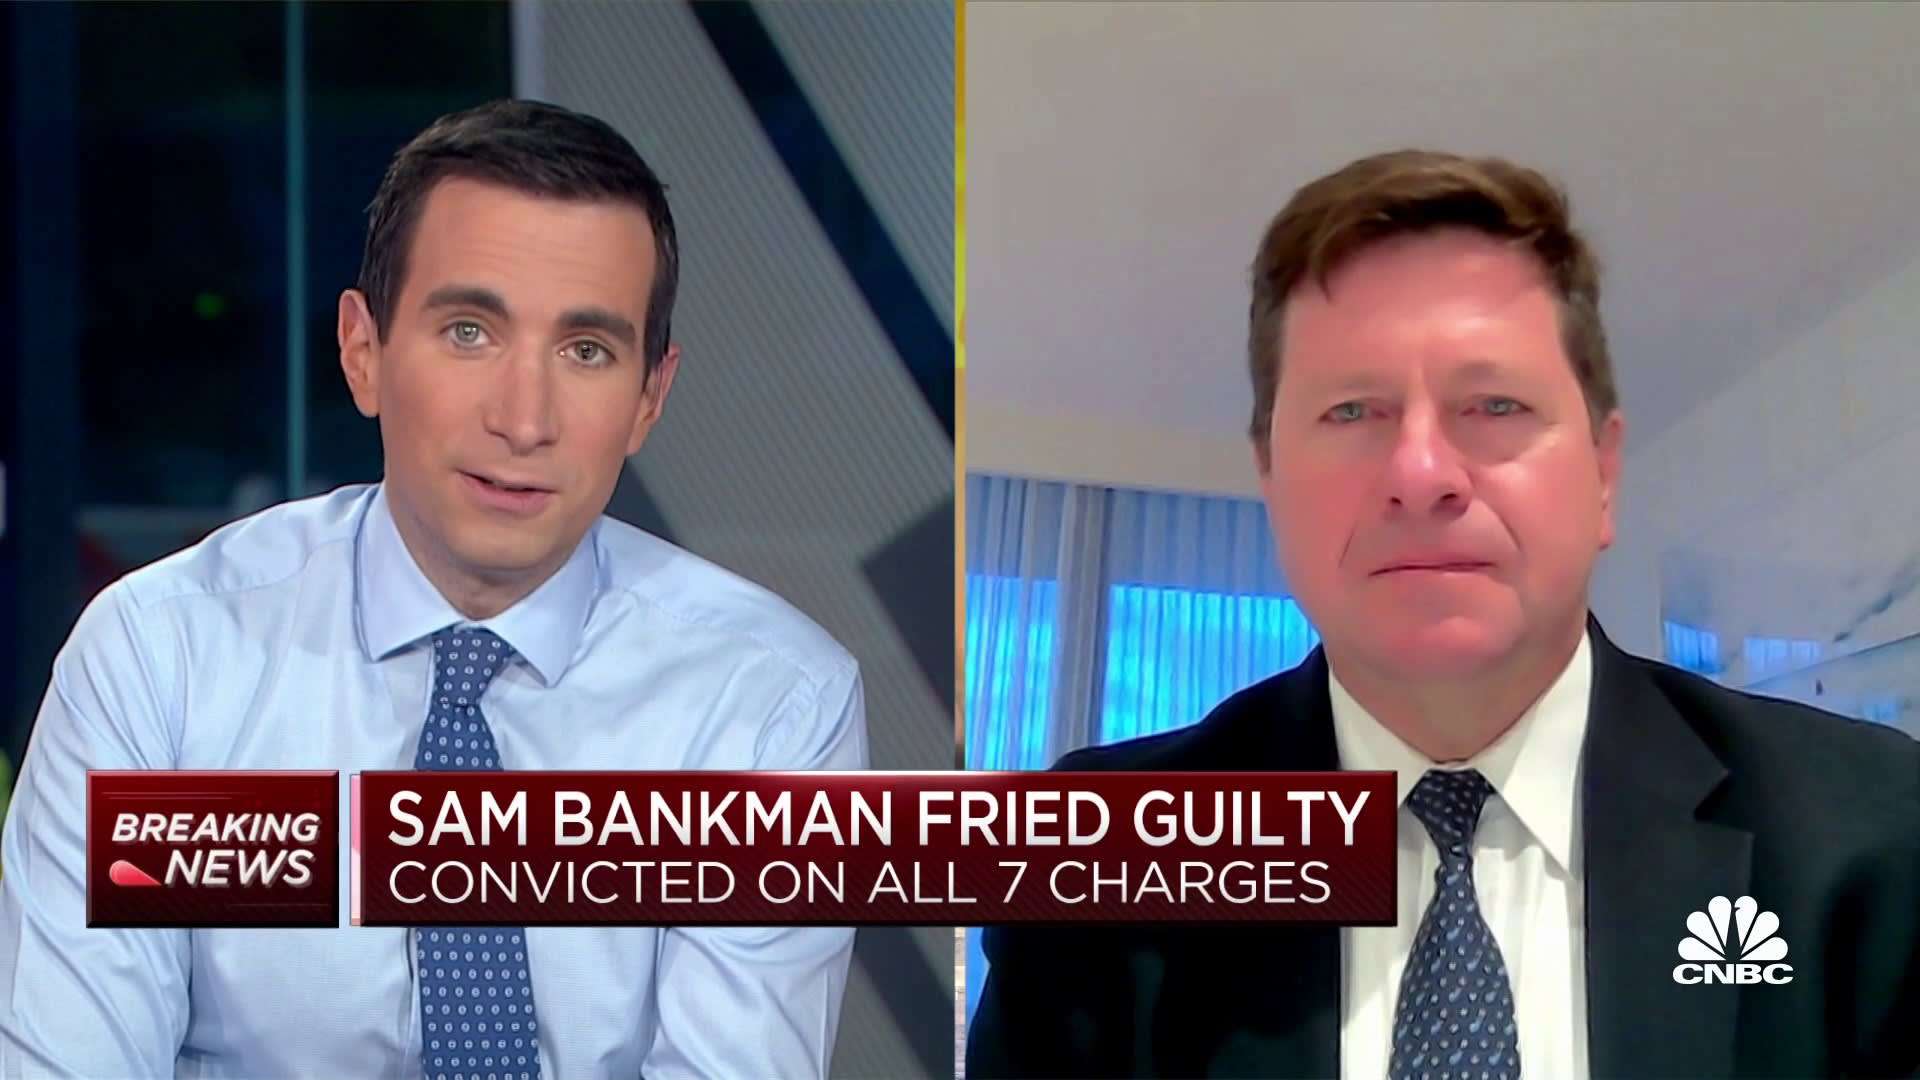 Fmr. SEC Chair Jay Clayton: SBF trial is 'one of the largest campaign finance problems in history'